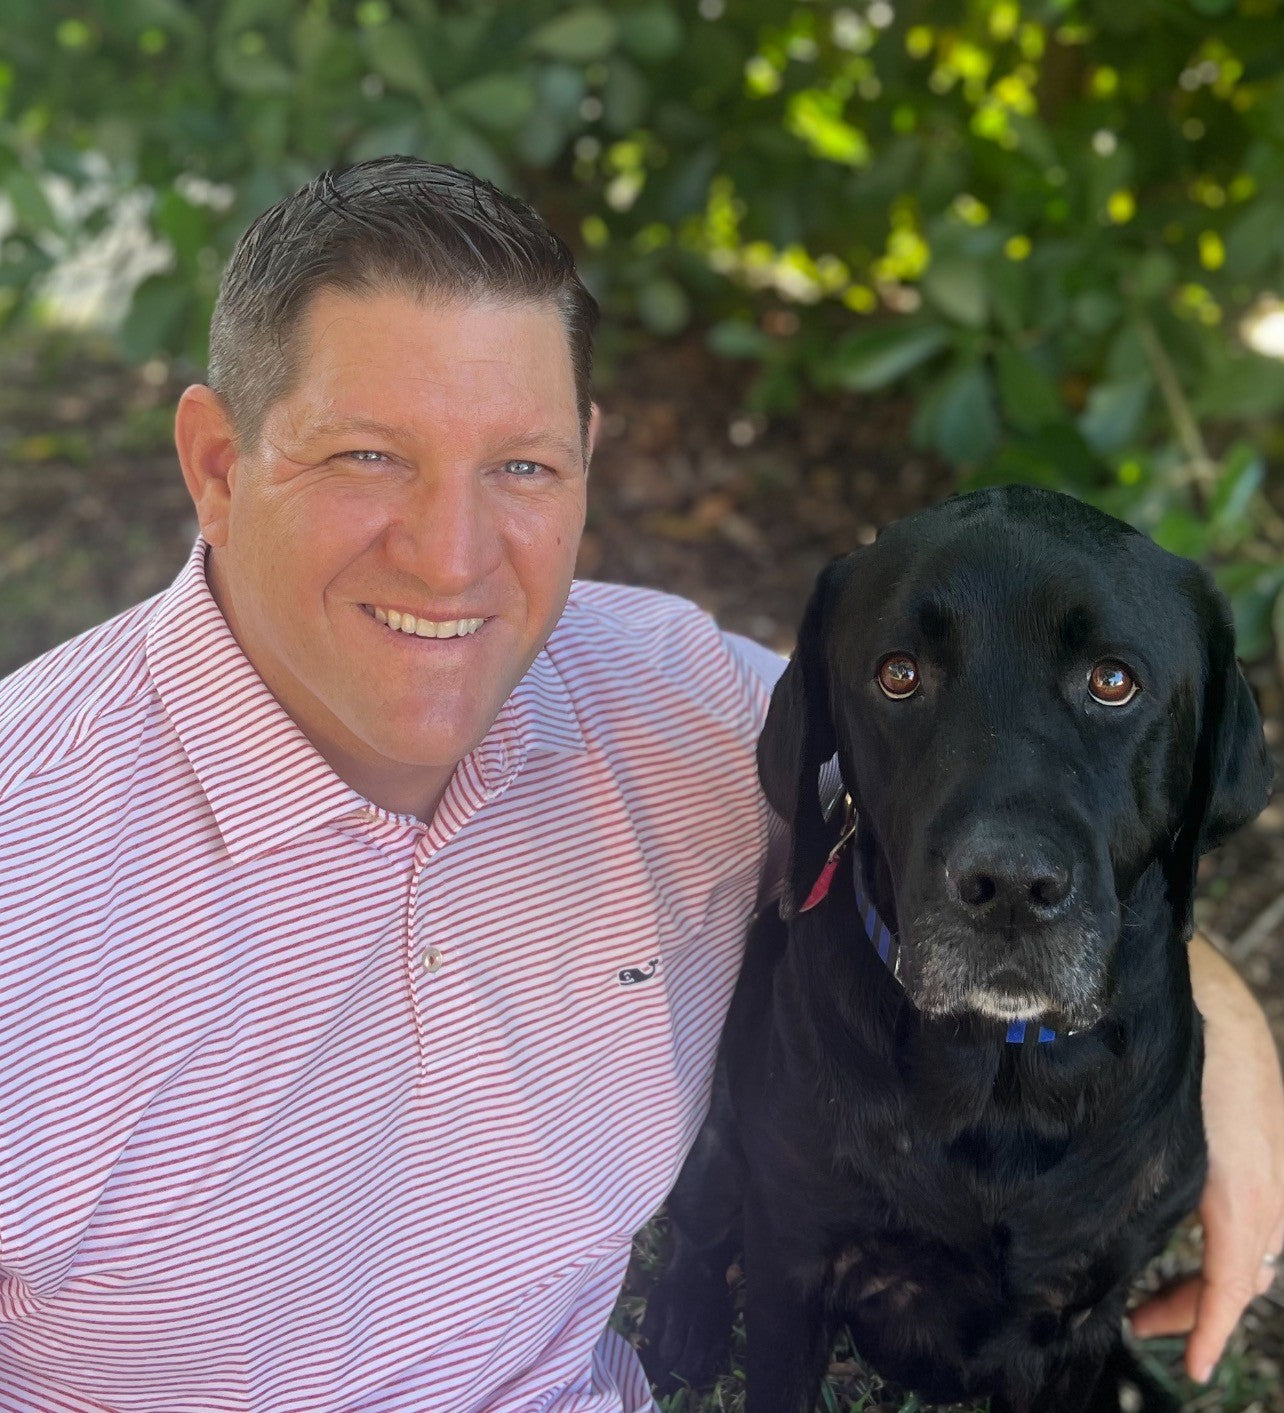 The image is of Dan Downs, National Veterinary Sales Manager at YuMOVE, with a black dog in front of a leafy green background.